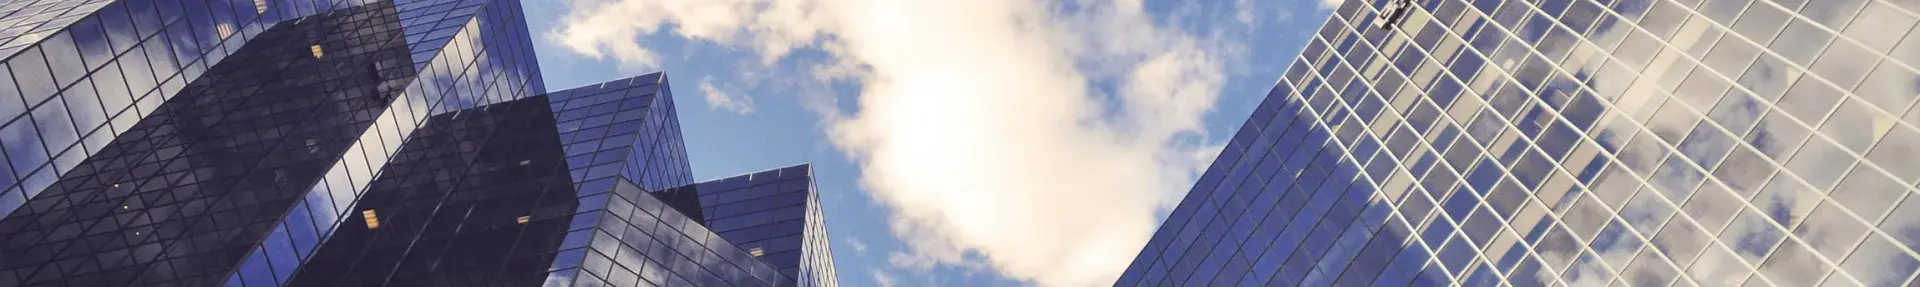 Image: upward view of skyscrapers. Topic: Break up with your mega-bank